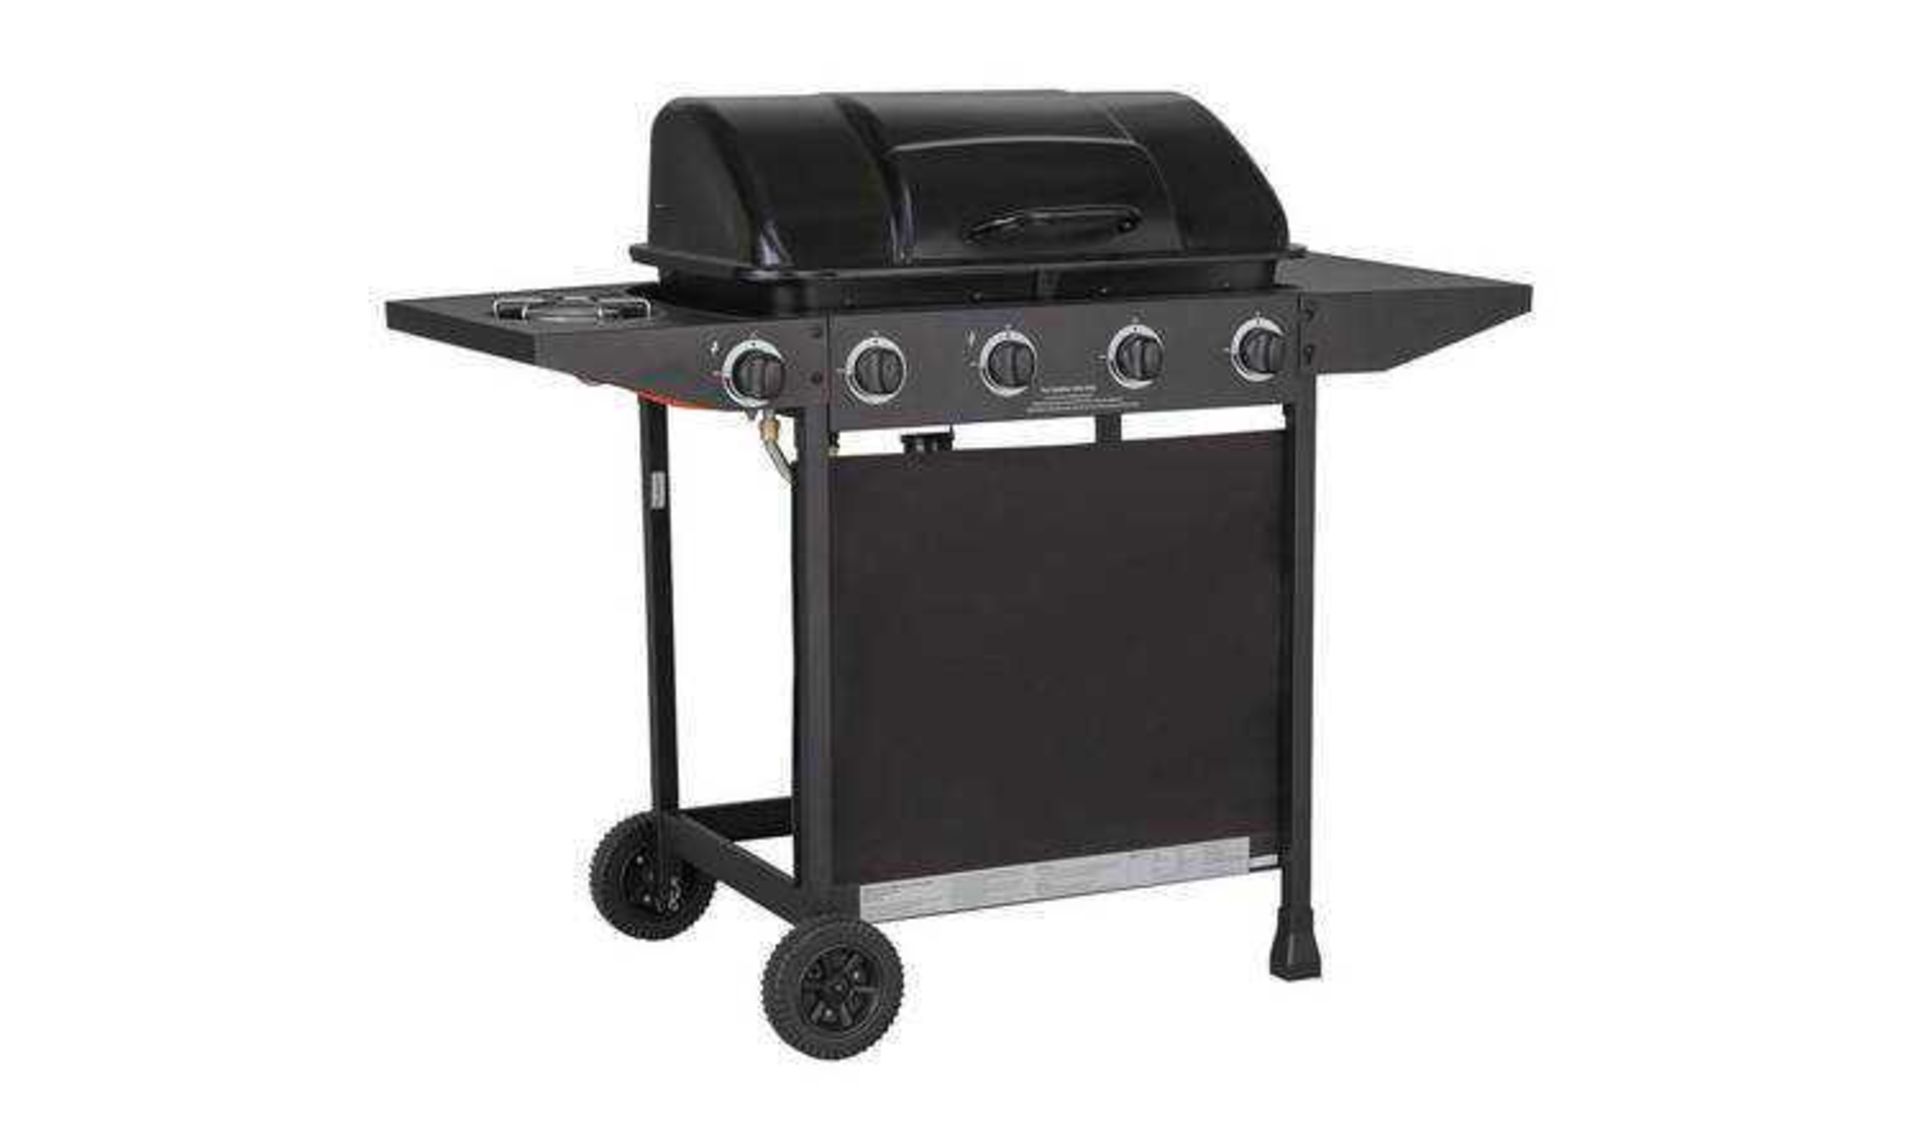 Rrp £200 Boxed Uniflame 4-Burner Propane Gas Grill With Side Burner